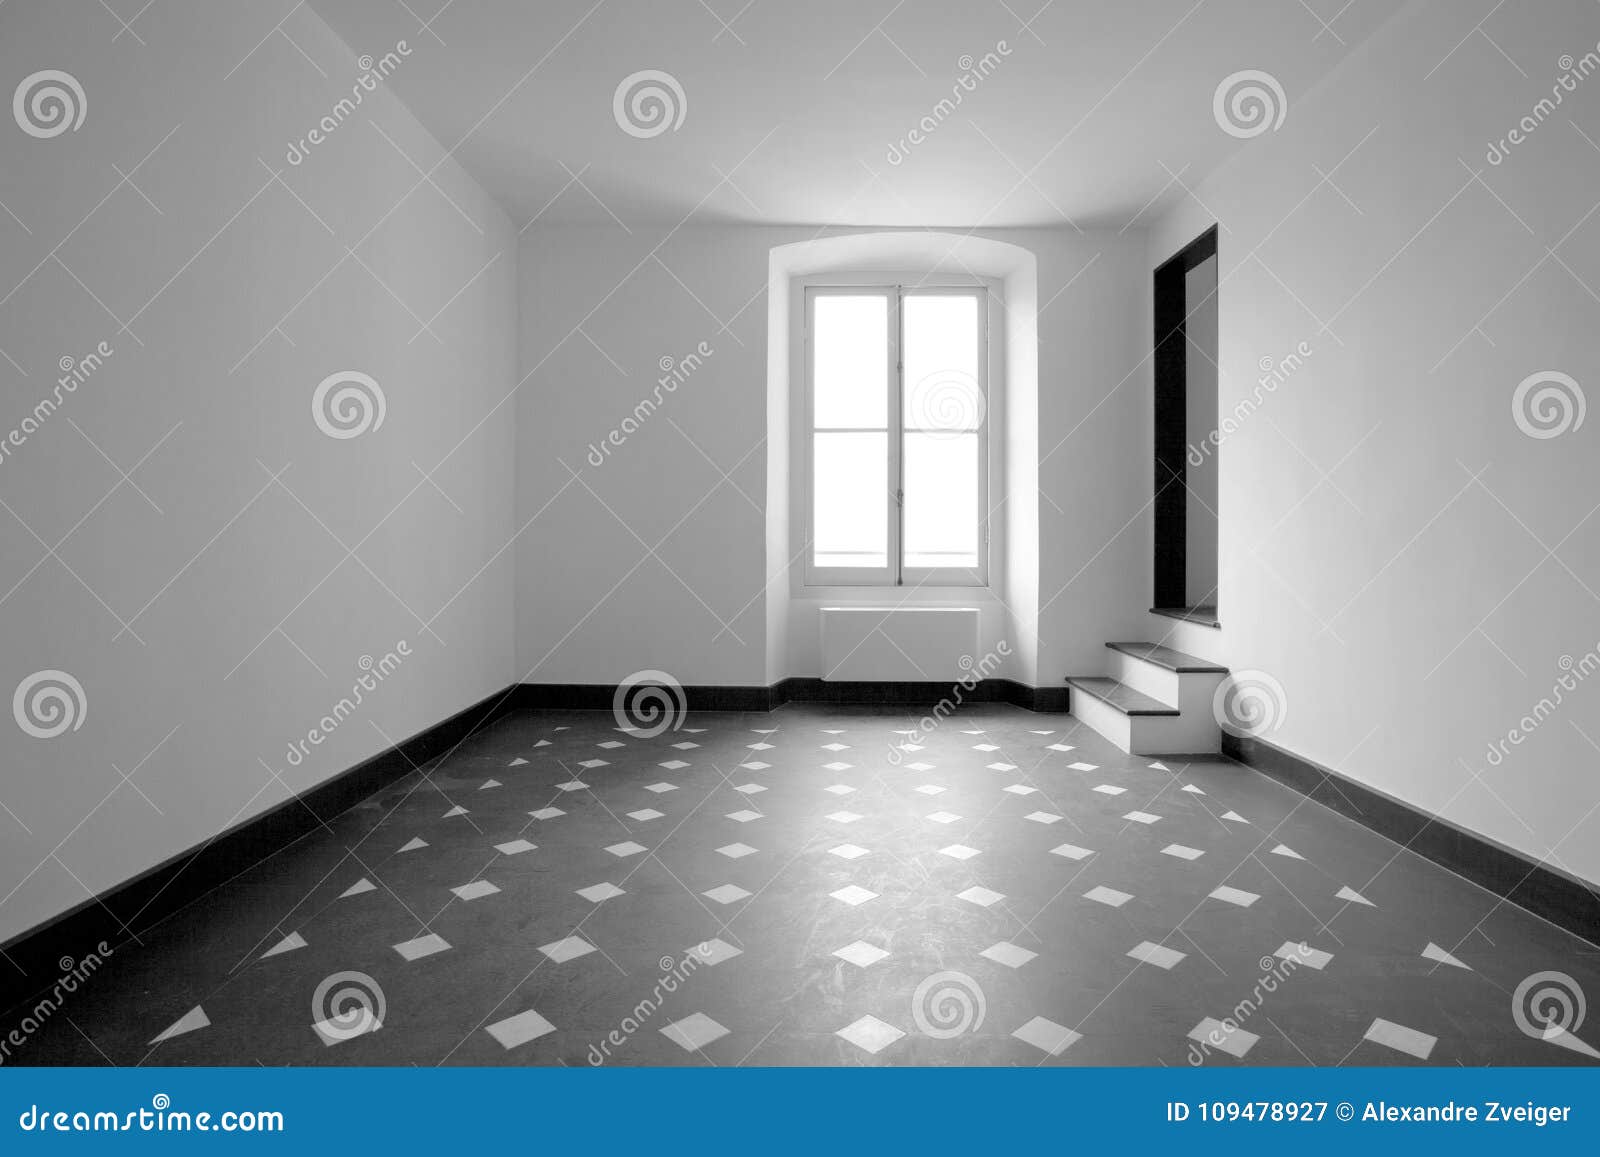 Empty Room With Black And White Tile Stock Image Image of house, minimalist 109478927